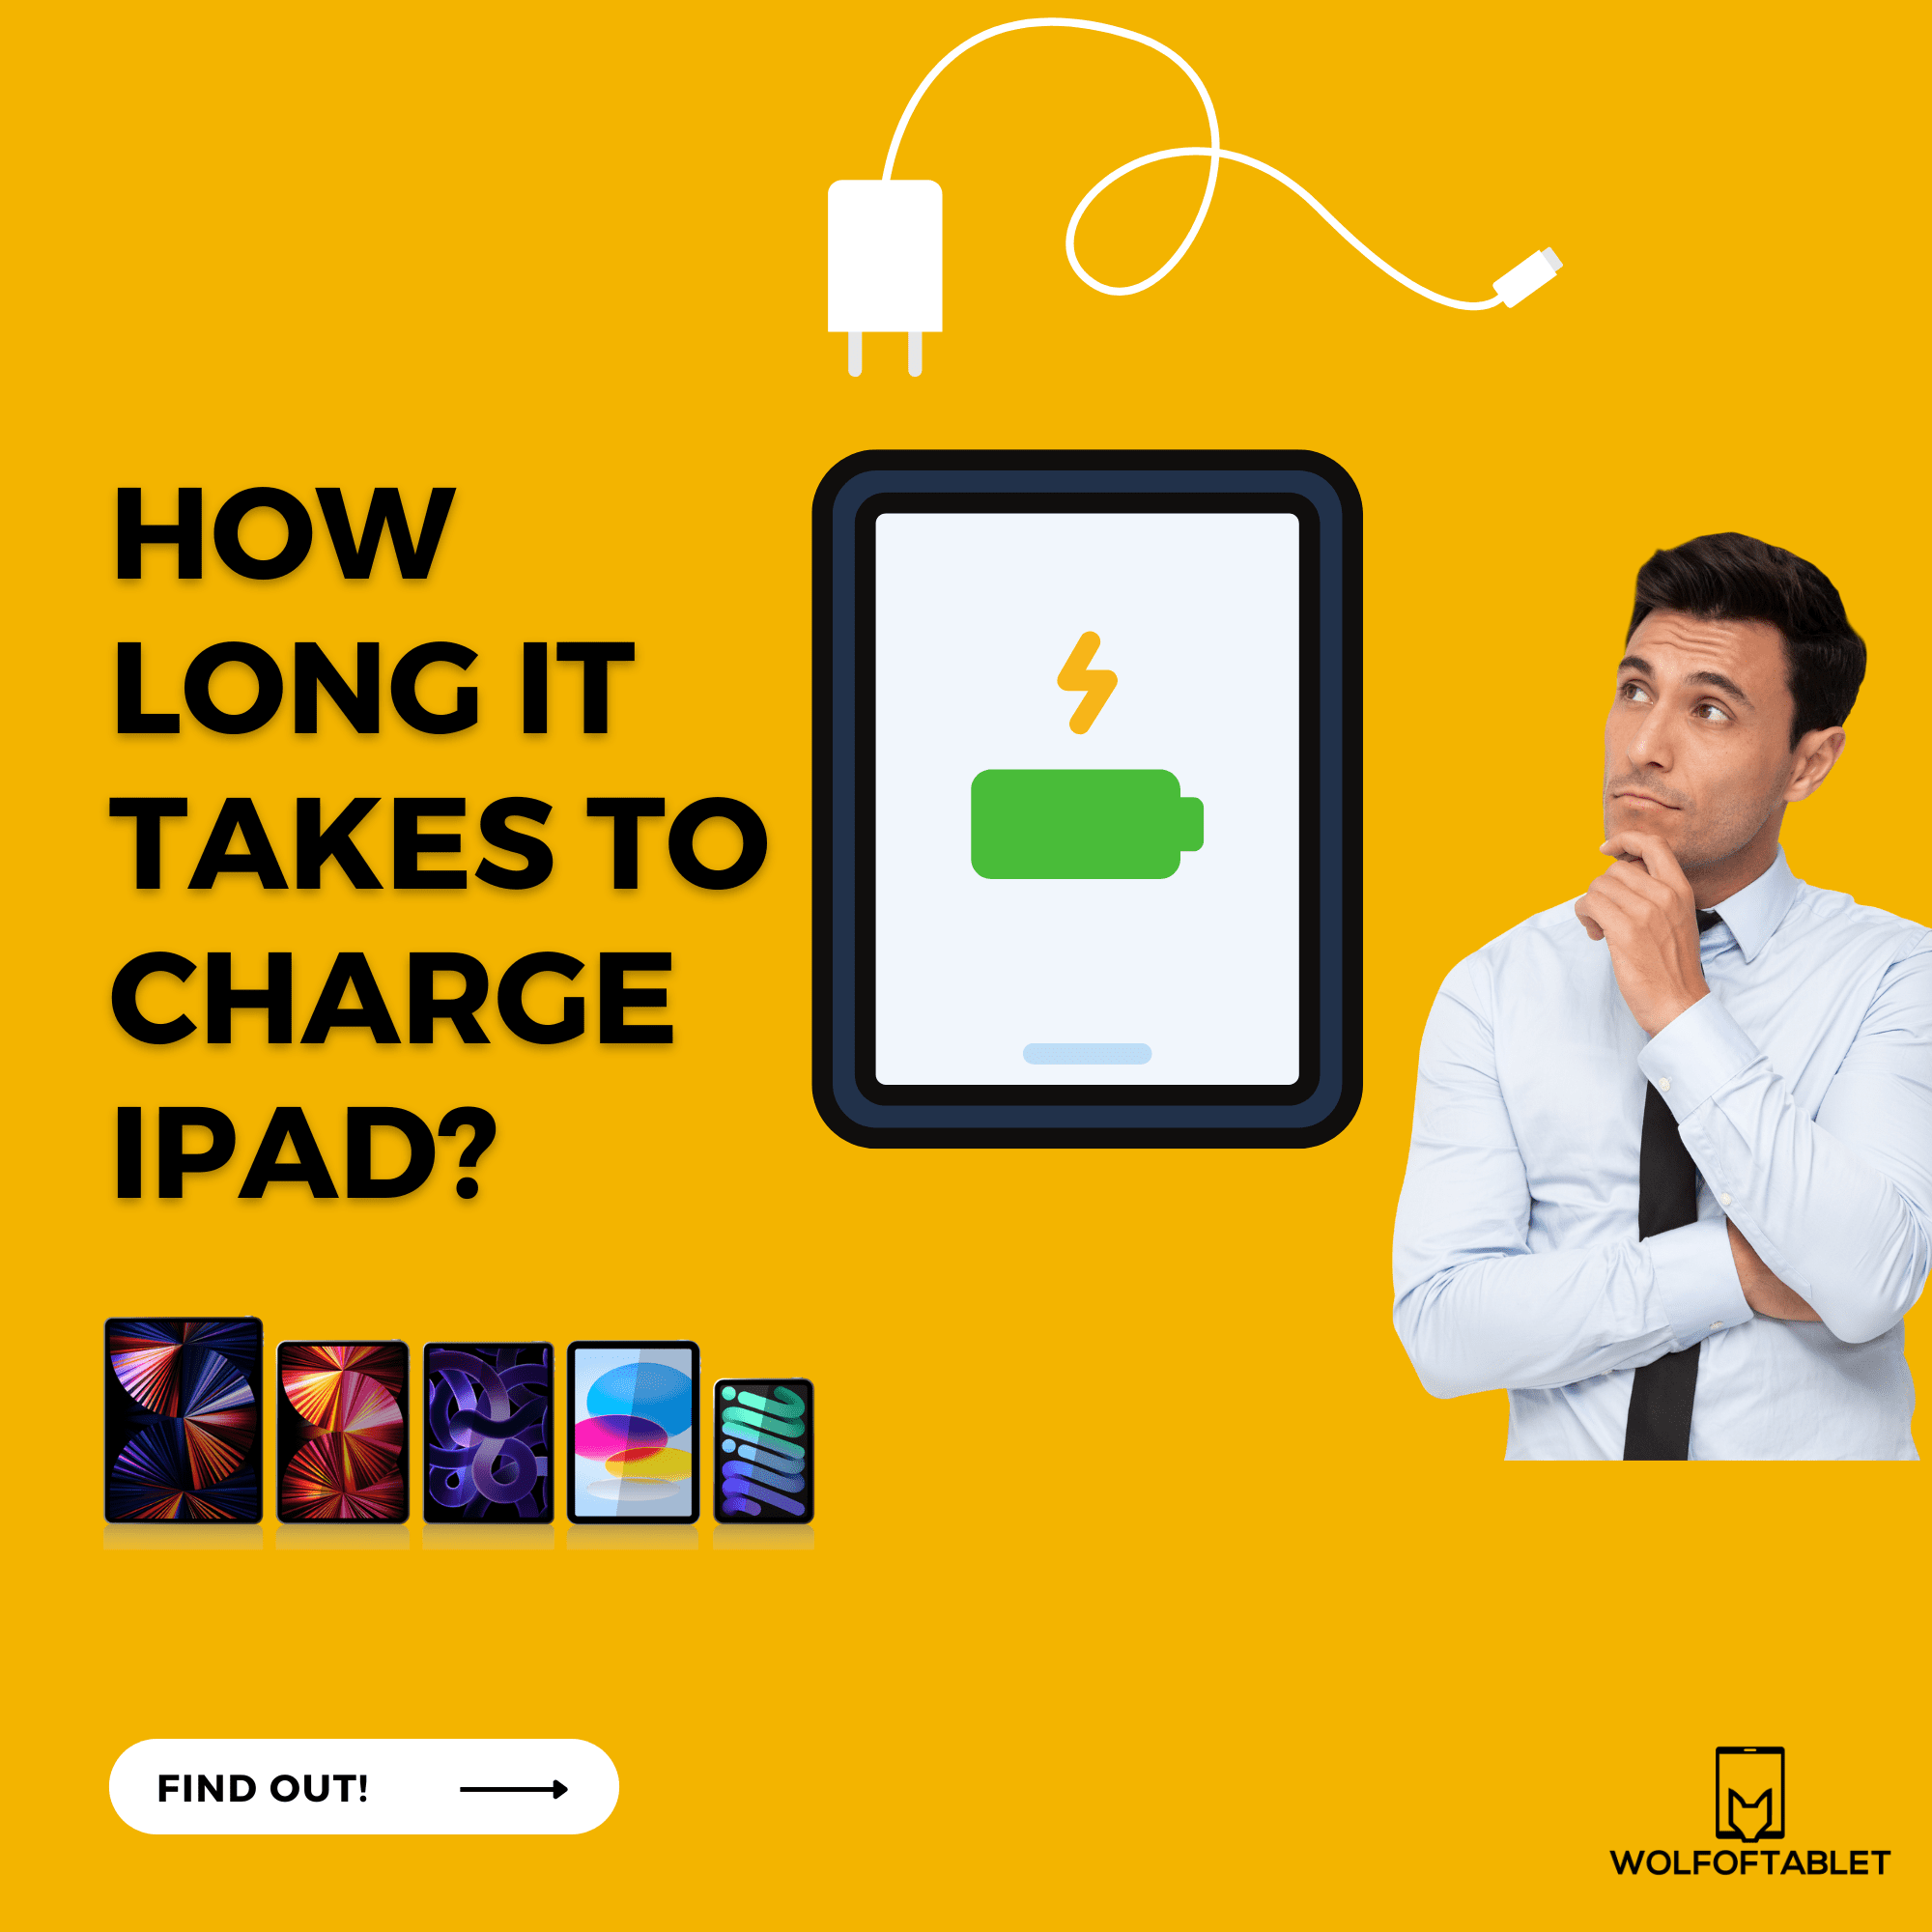 how long it takes to charge ipad from 0 to 100 percent - answered